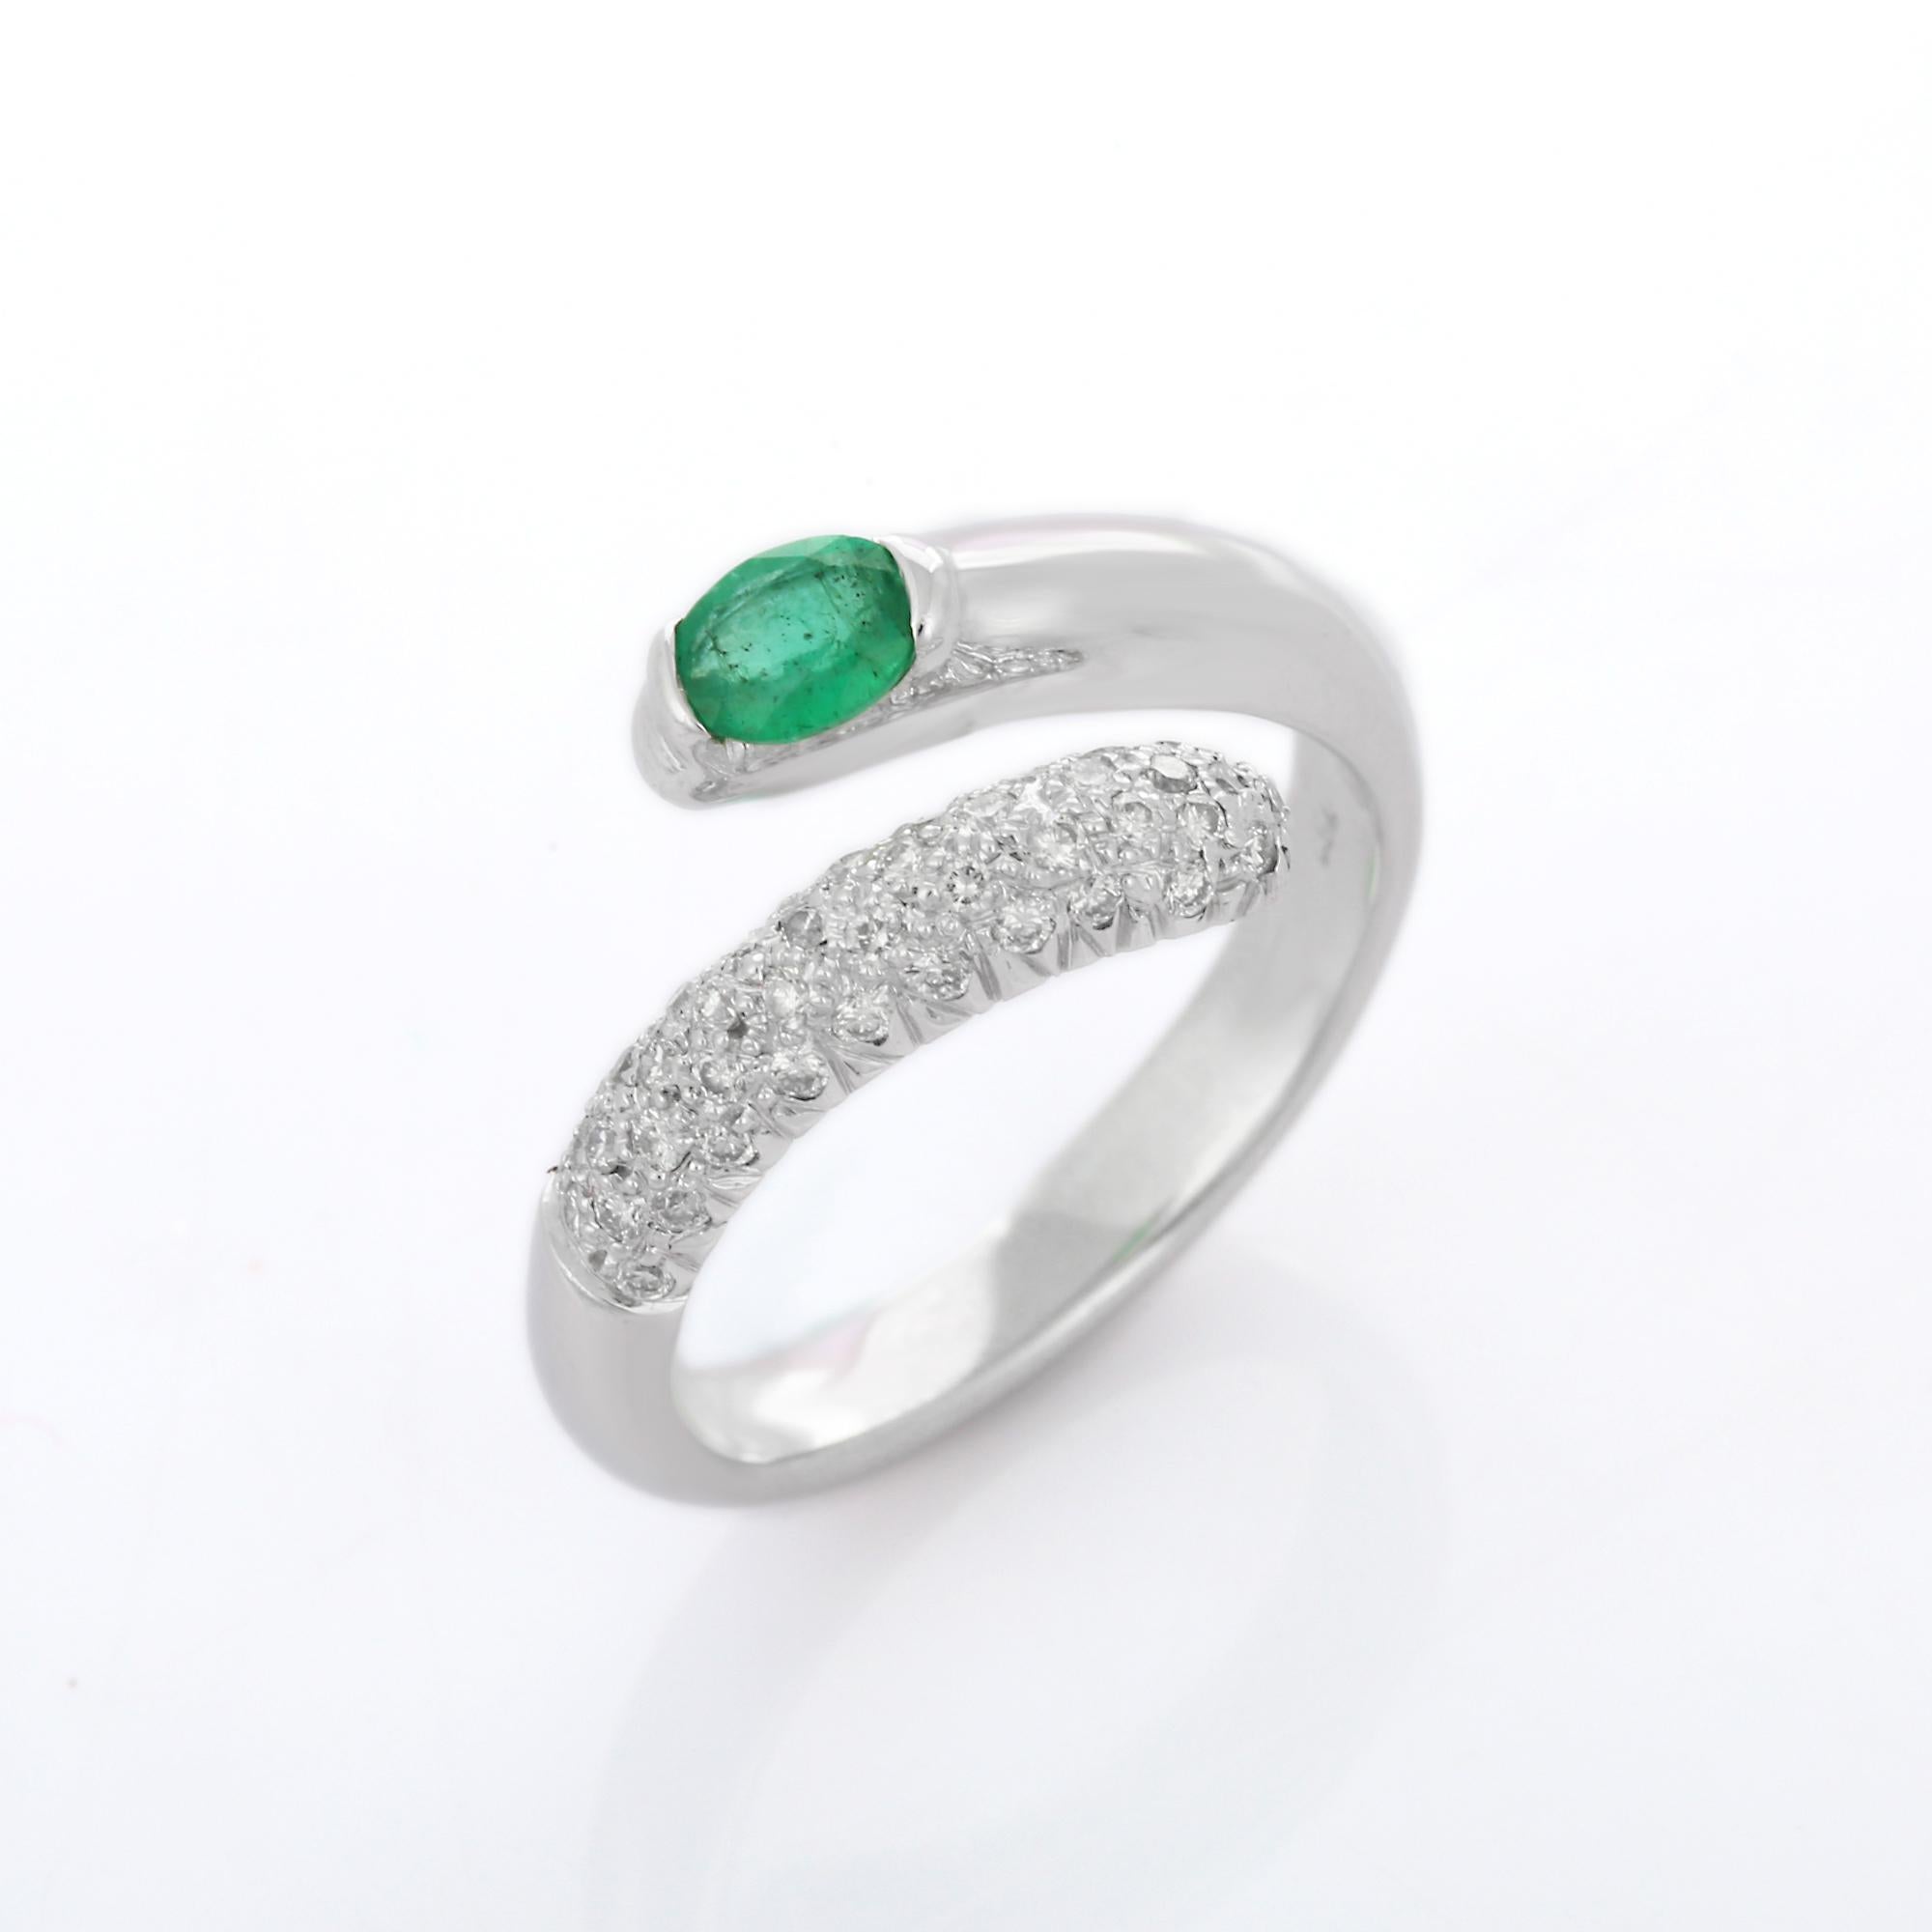 For Sale:  Substantial 18K White Gold Emerald Bypass Ring with Diamonds  5